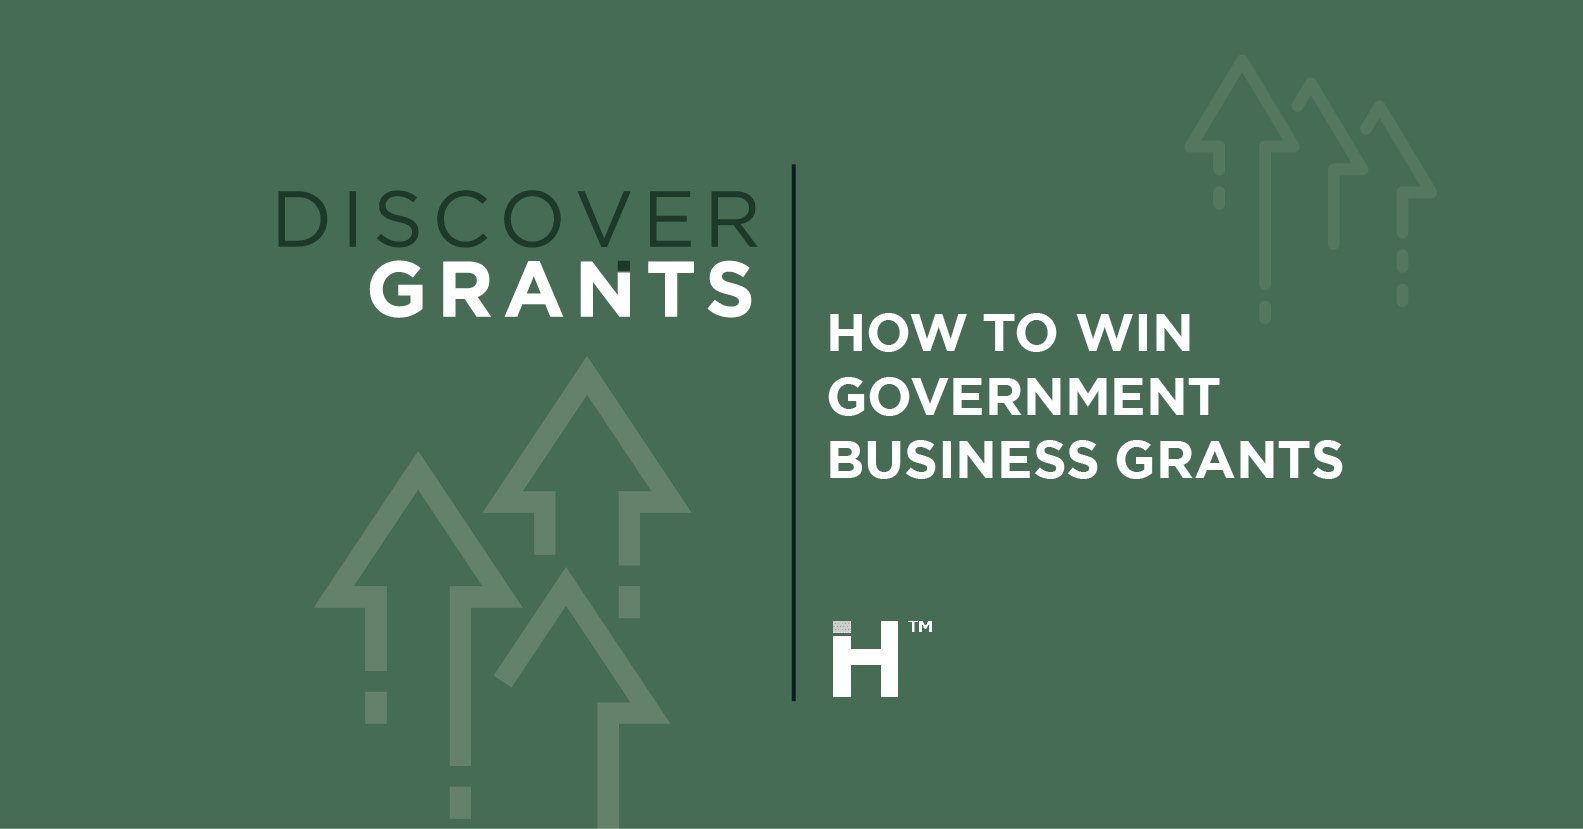 Our Guide to Government Business Grants